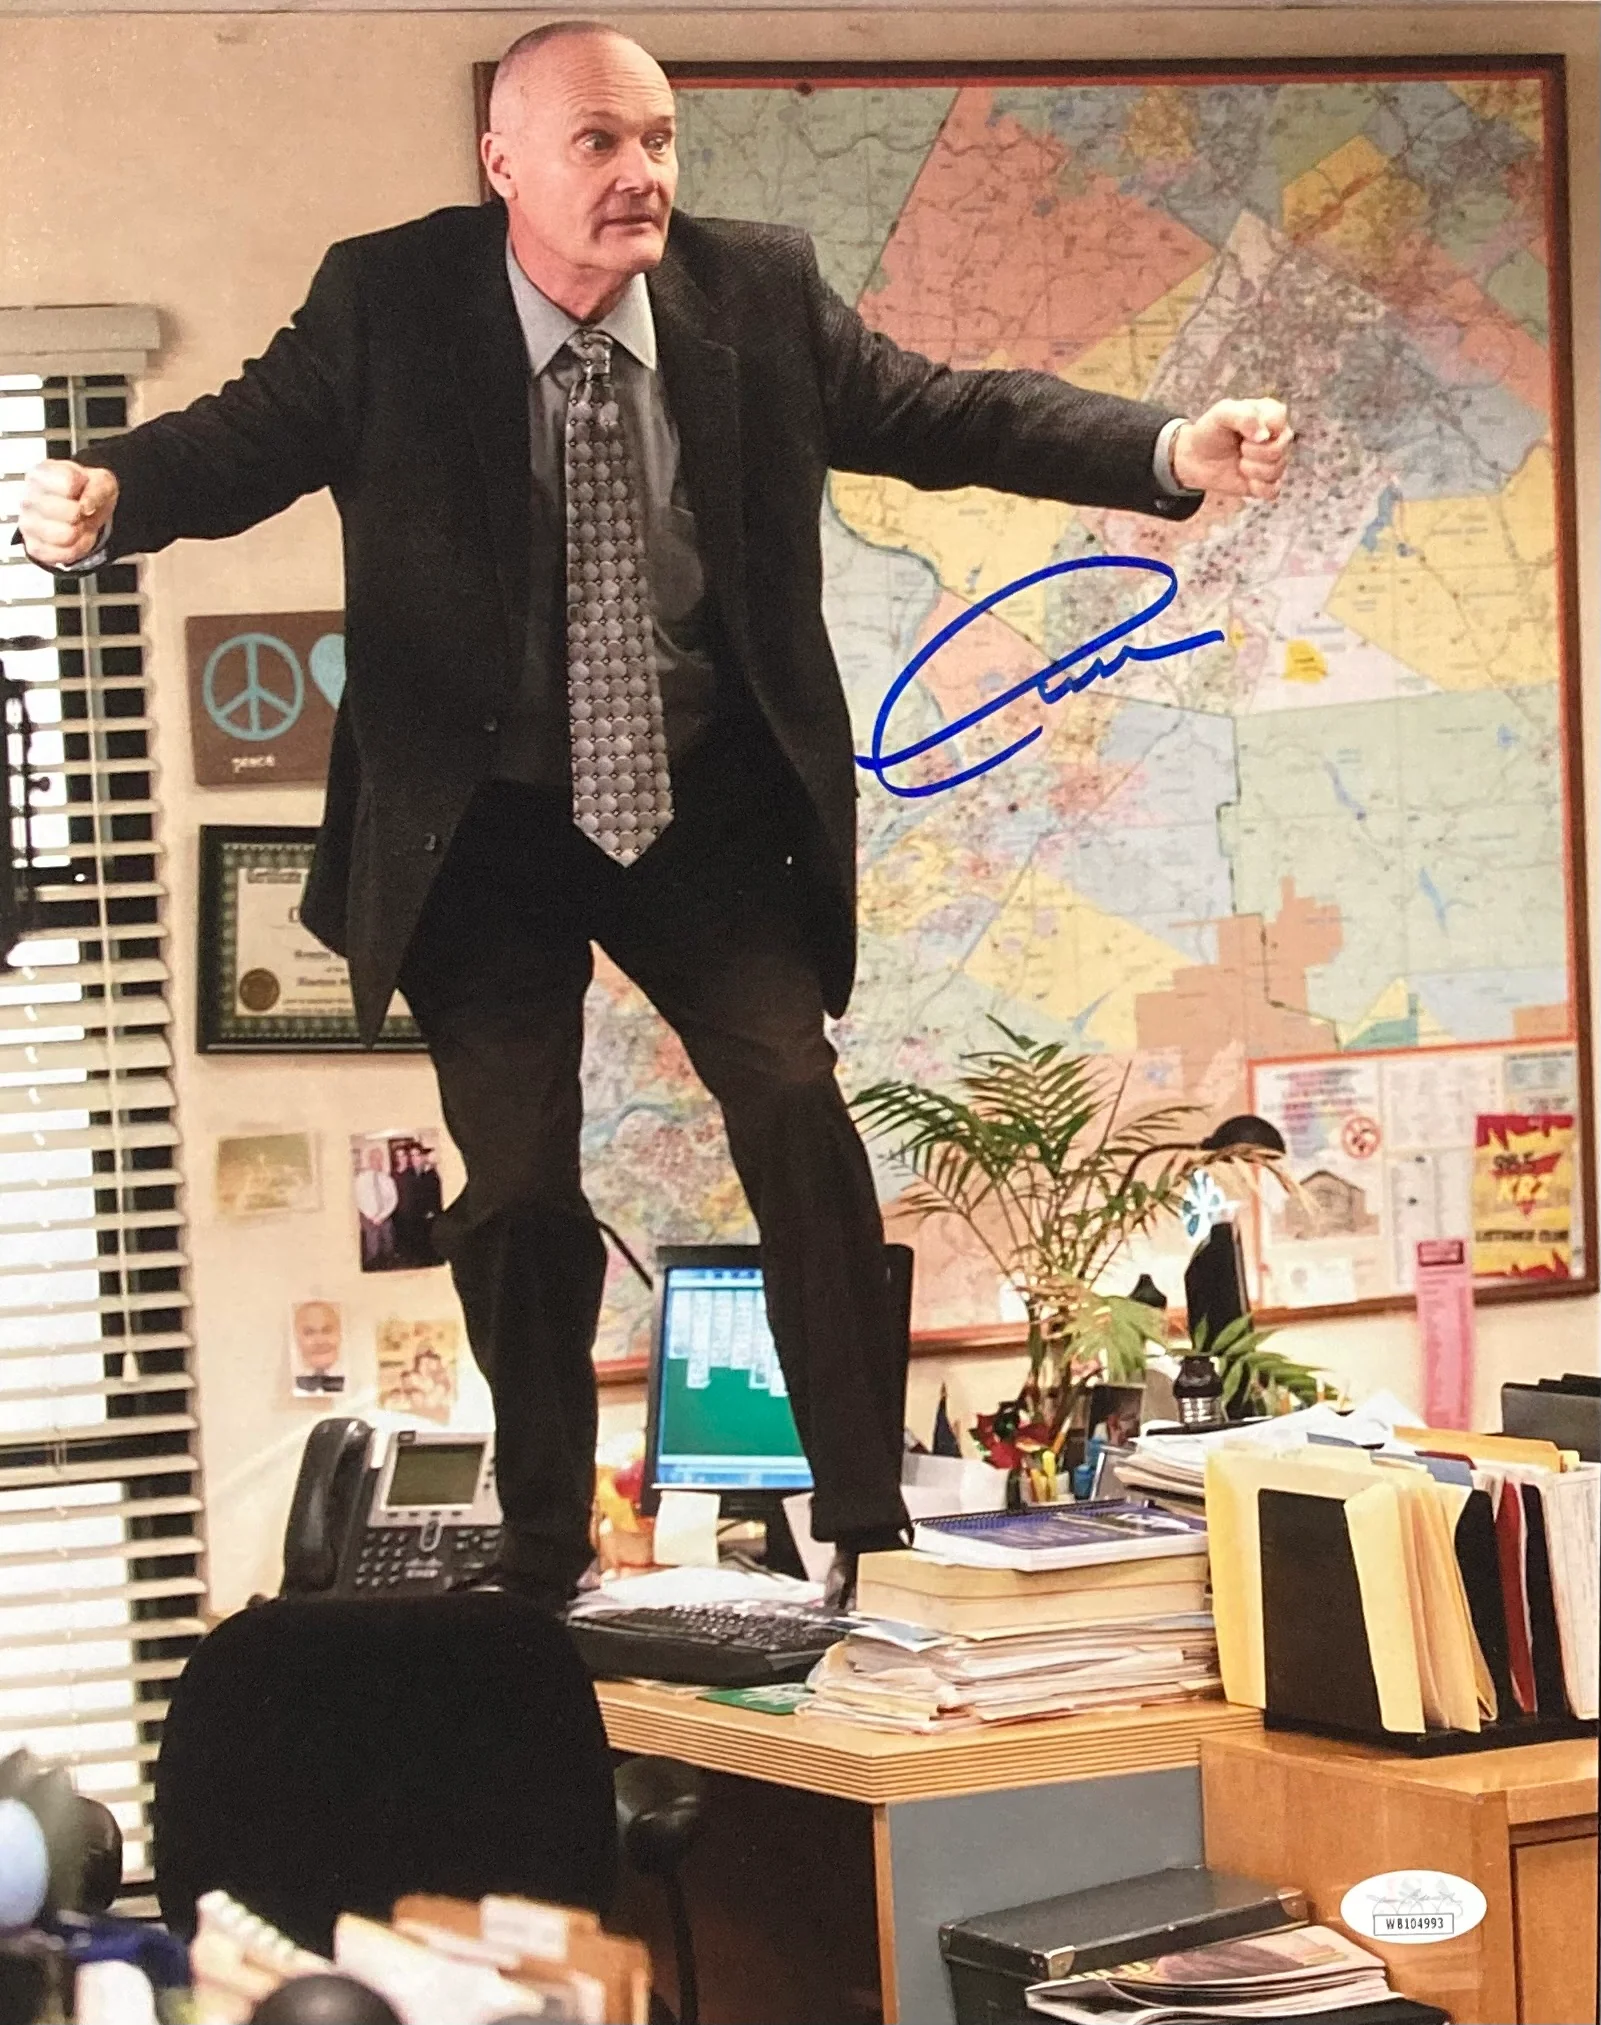 Creed Bratton Signed 11x14 The Office Creed Desk Photo JSA ITP - Blank Meme Template